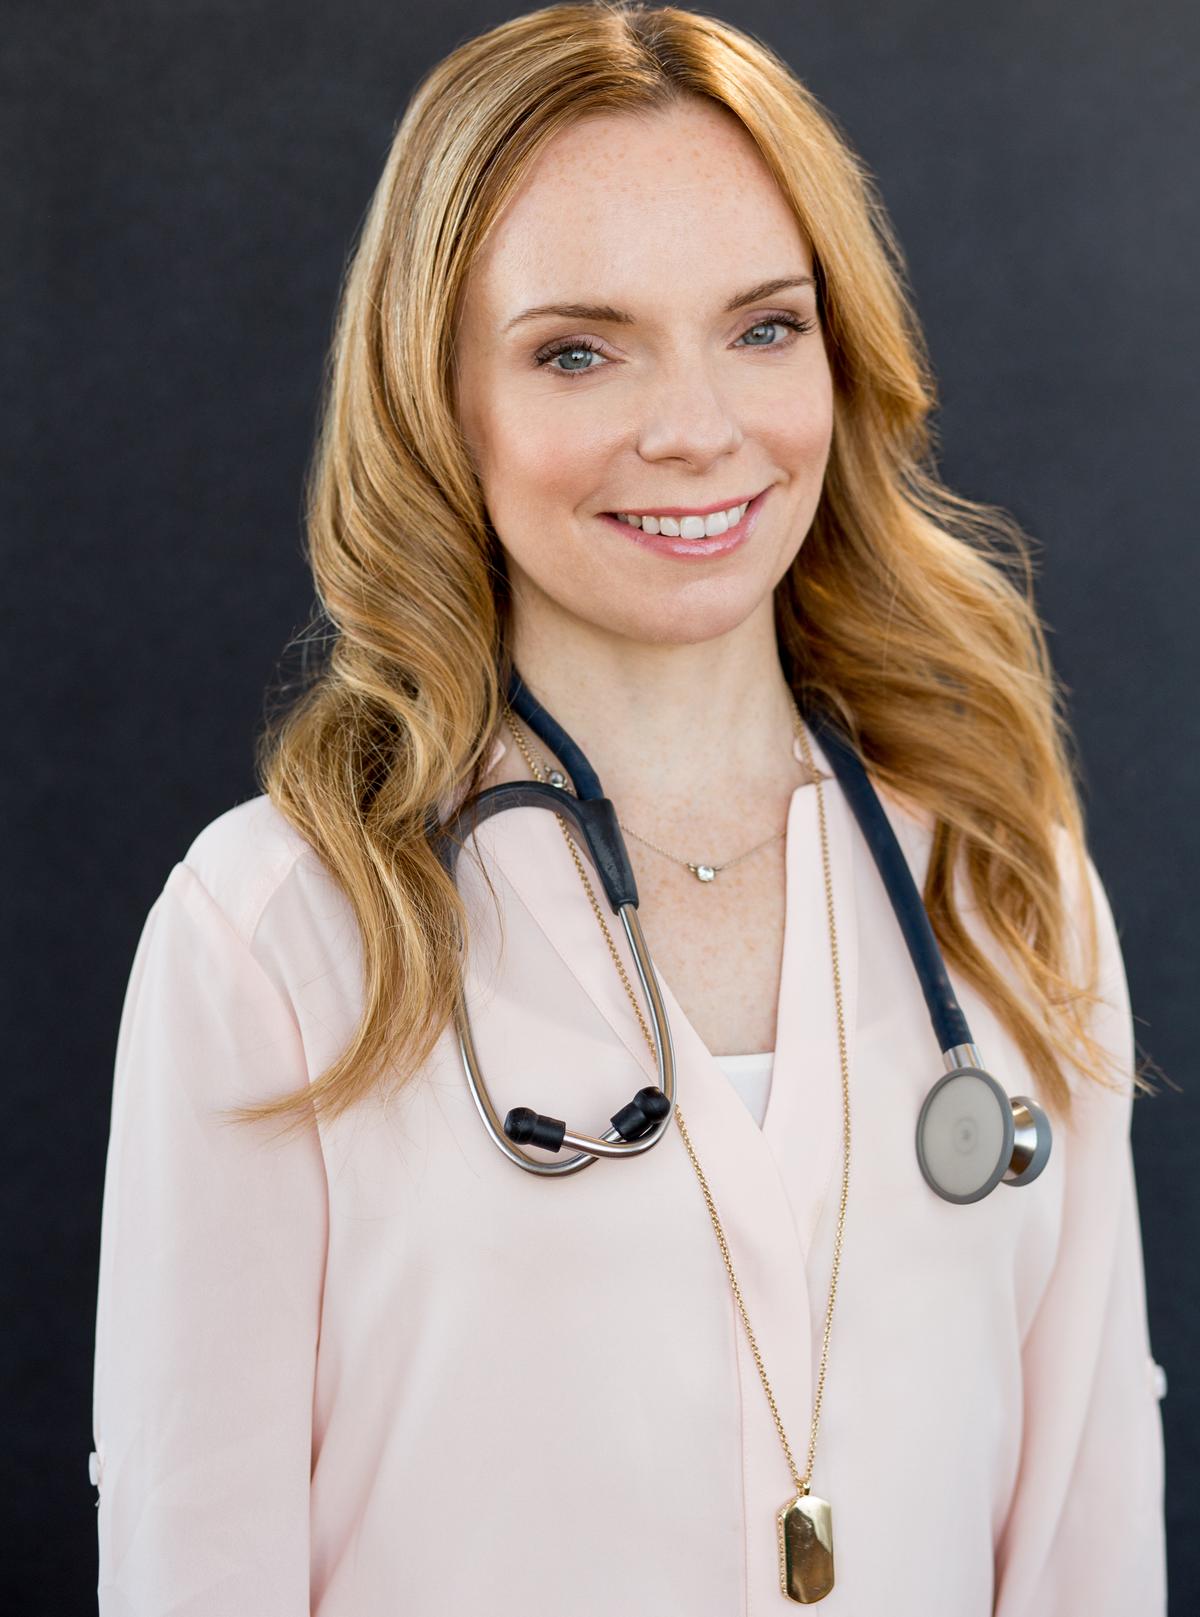 Dr. Fiona McCulloch is a naturopath practitioner based in Toronto. (Photo by David Chang)